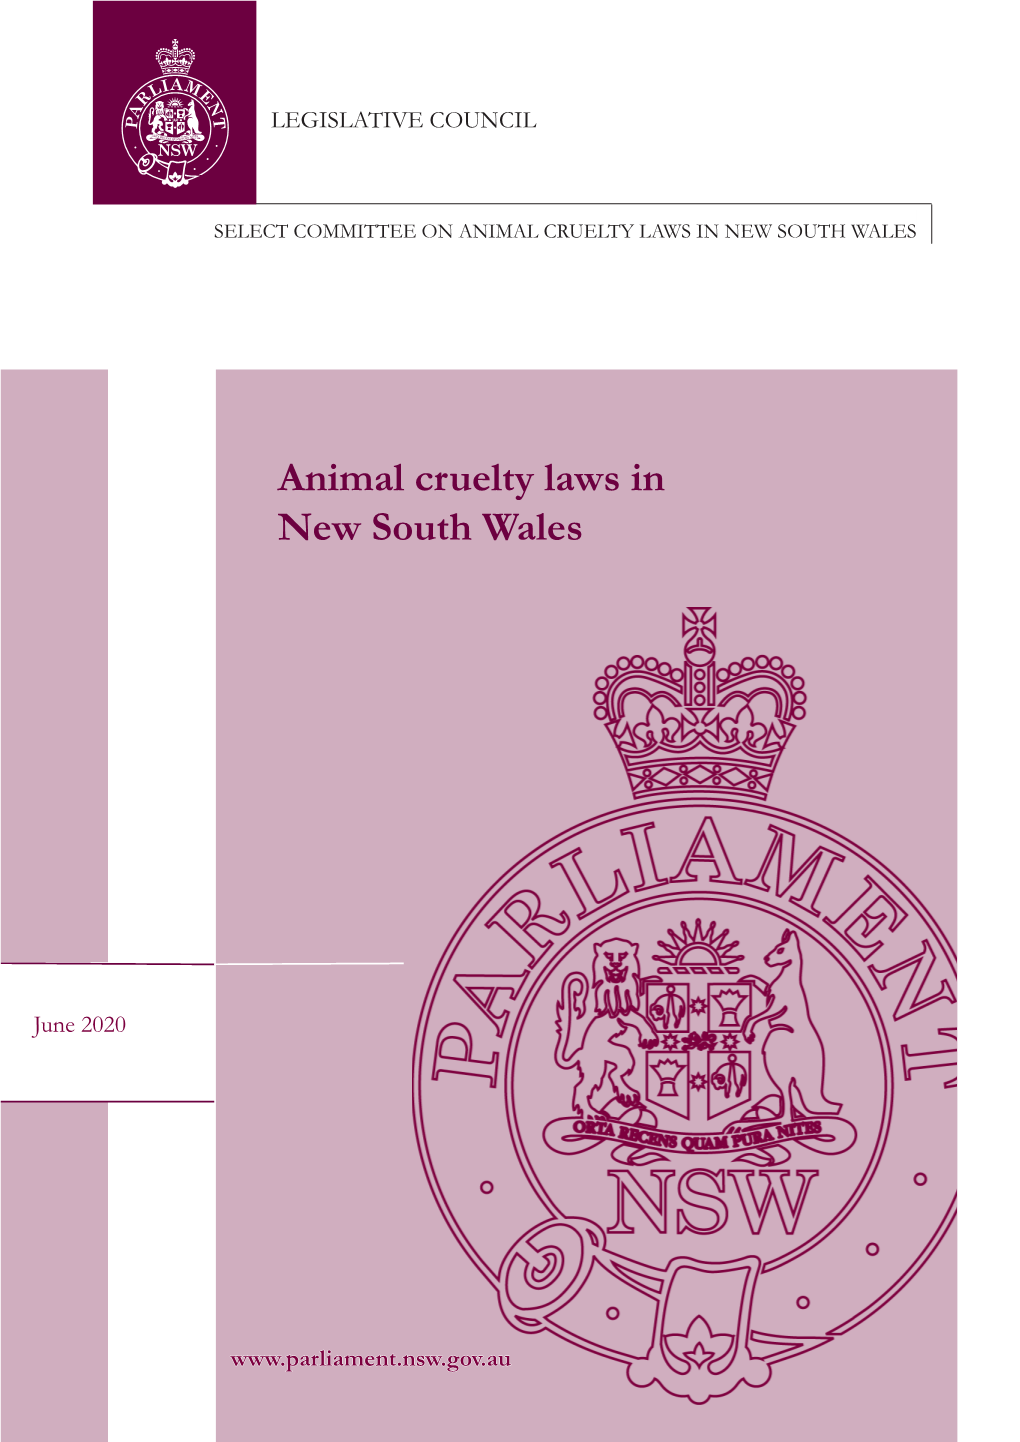 Select Committee on Animal Cruelty Laws in New South Wales